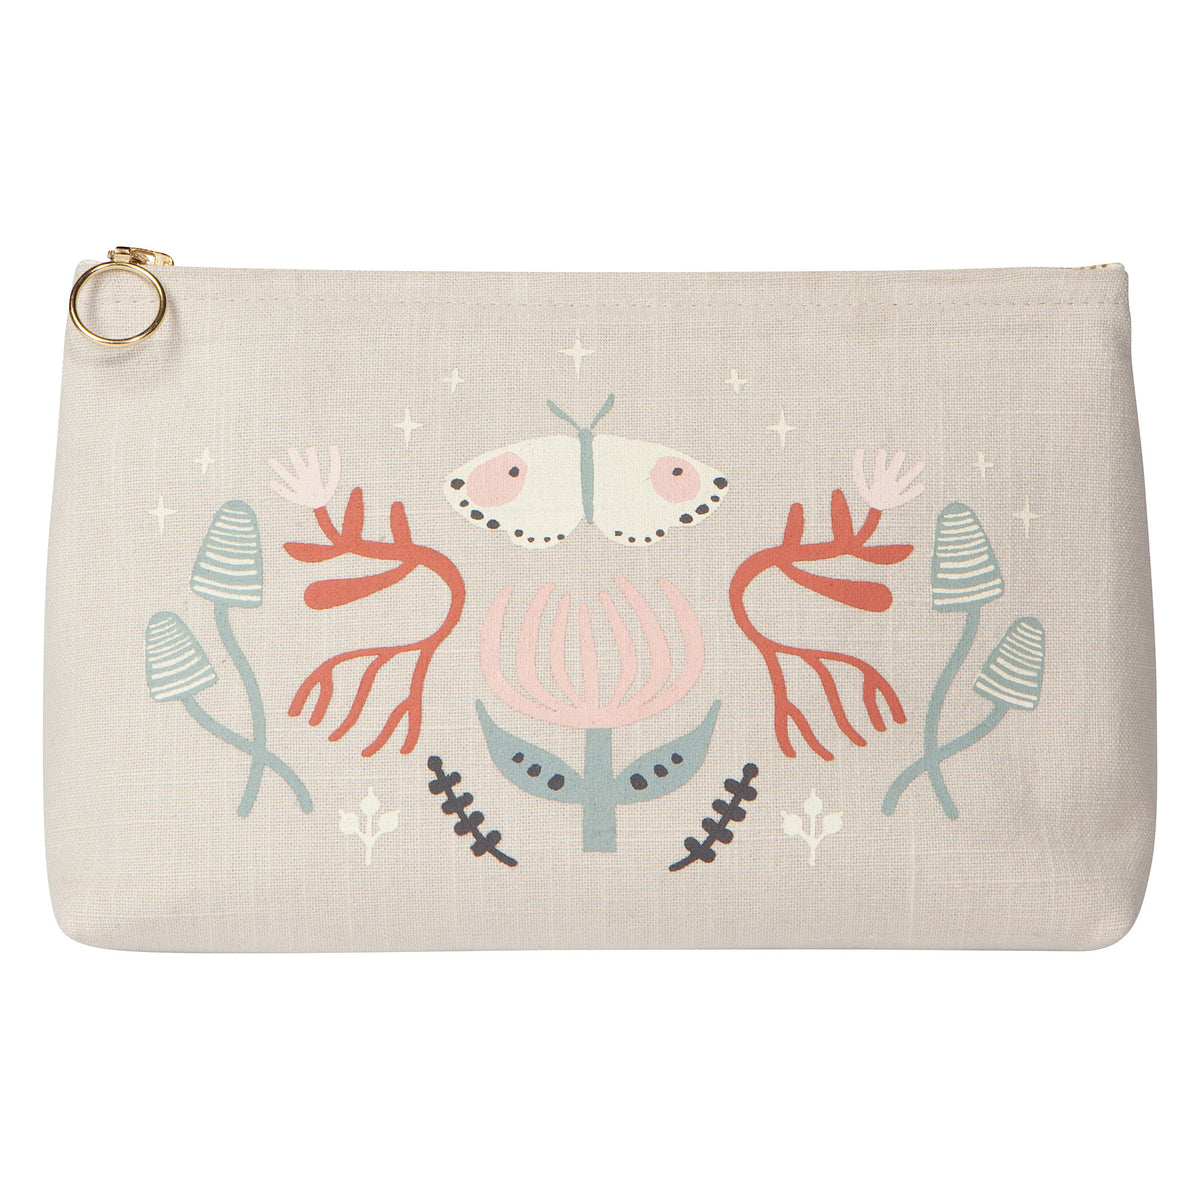 Far and Away, Linen Cosmetic Bag, Small